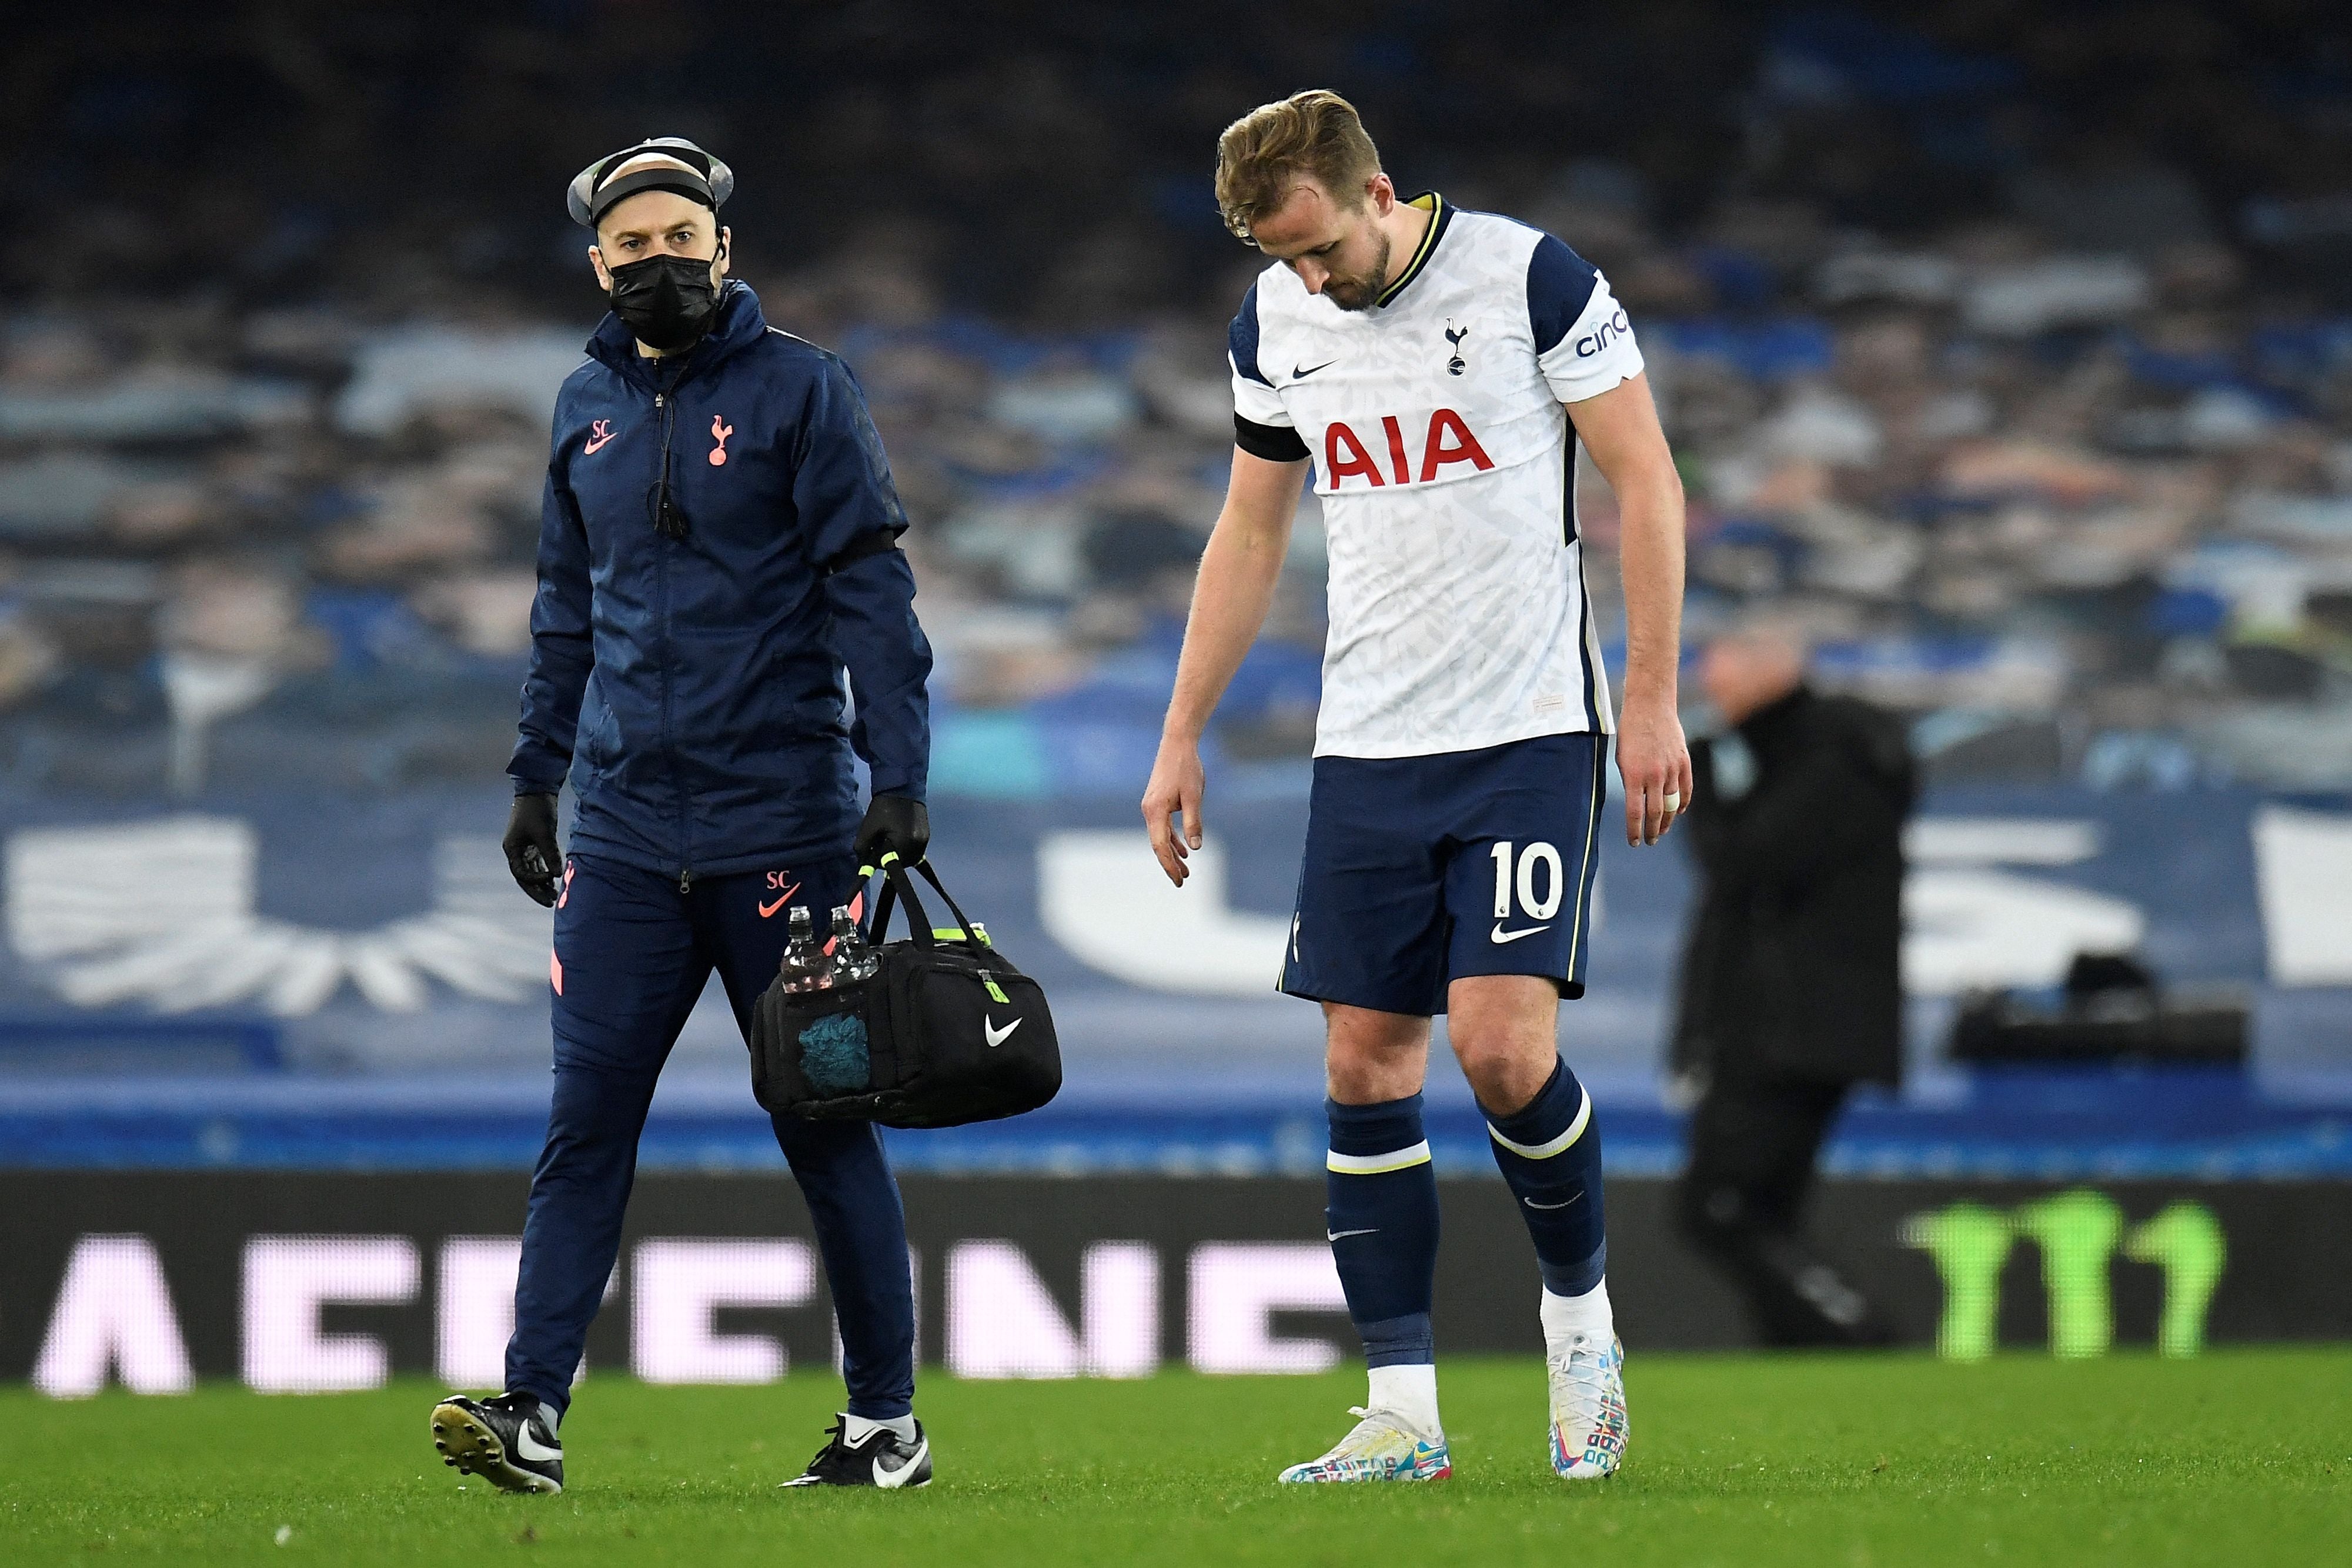 Harry Kane injured his ankle in the draw against Everton